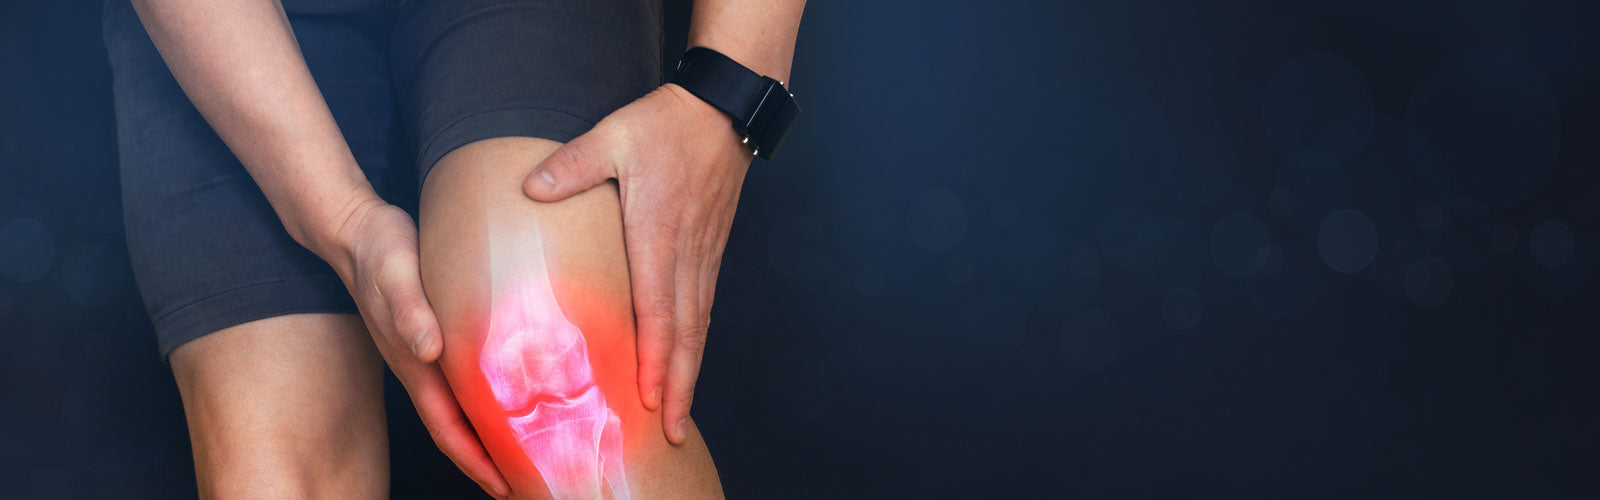 Man feeling joint pain in his knee